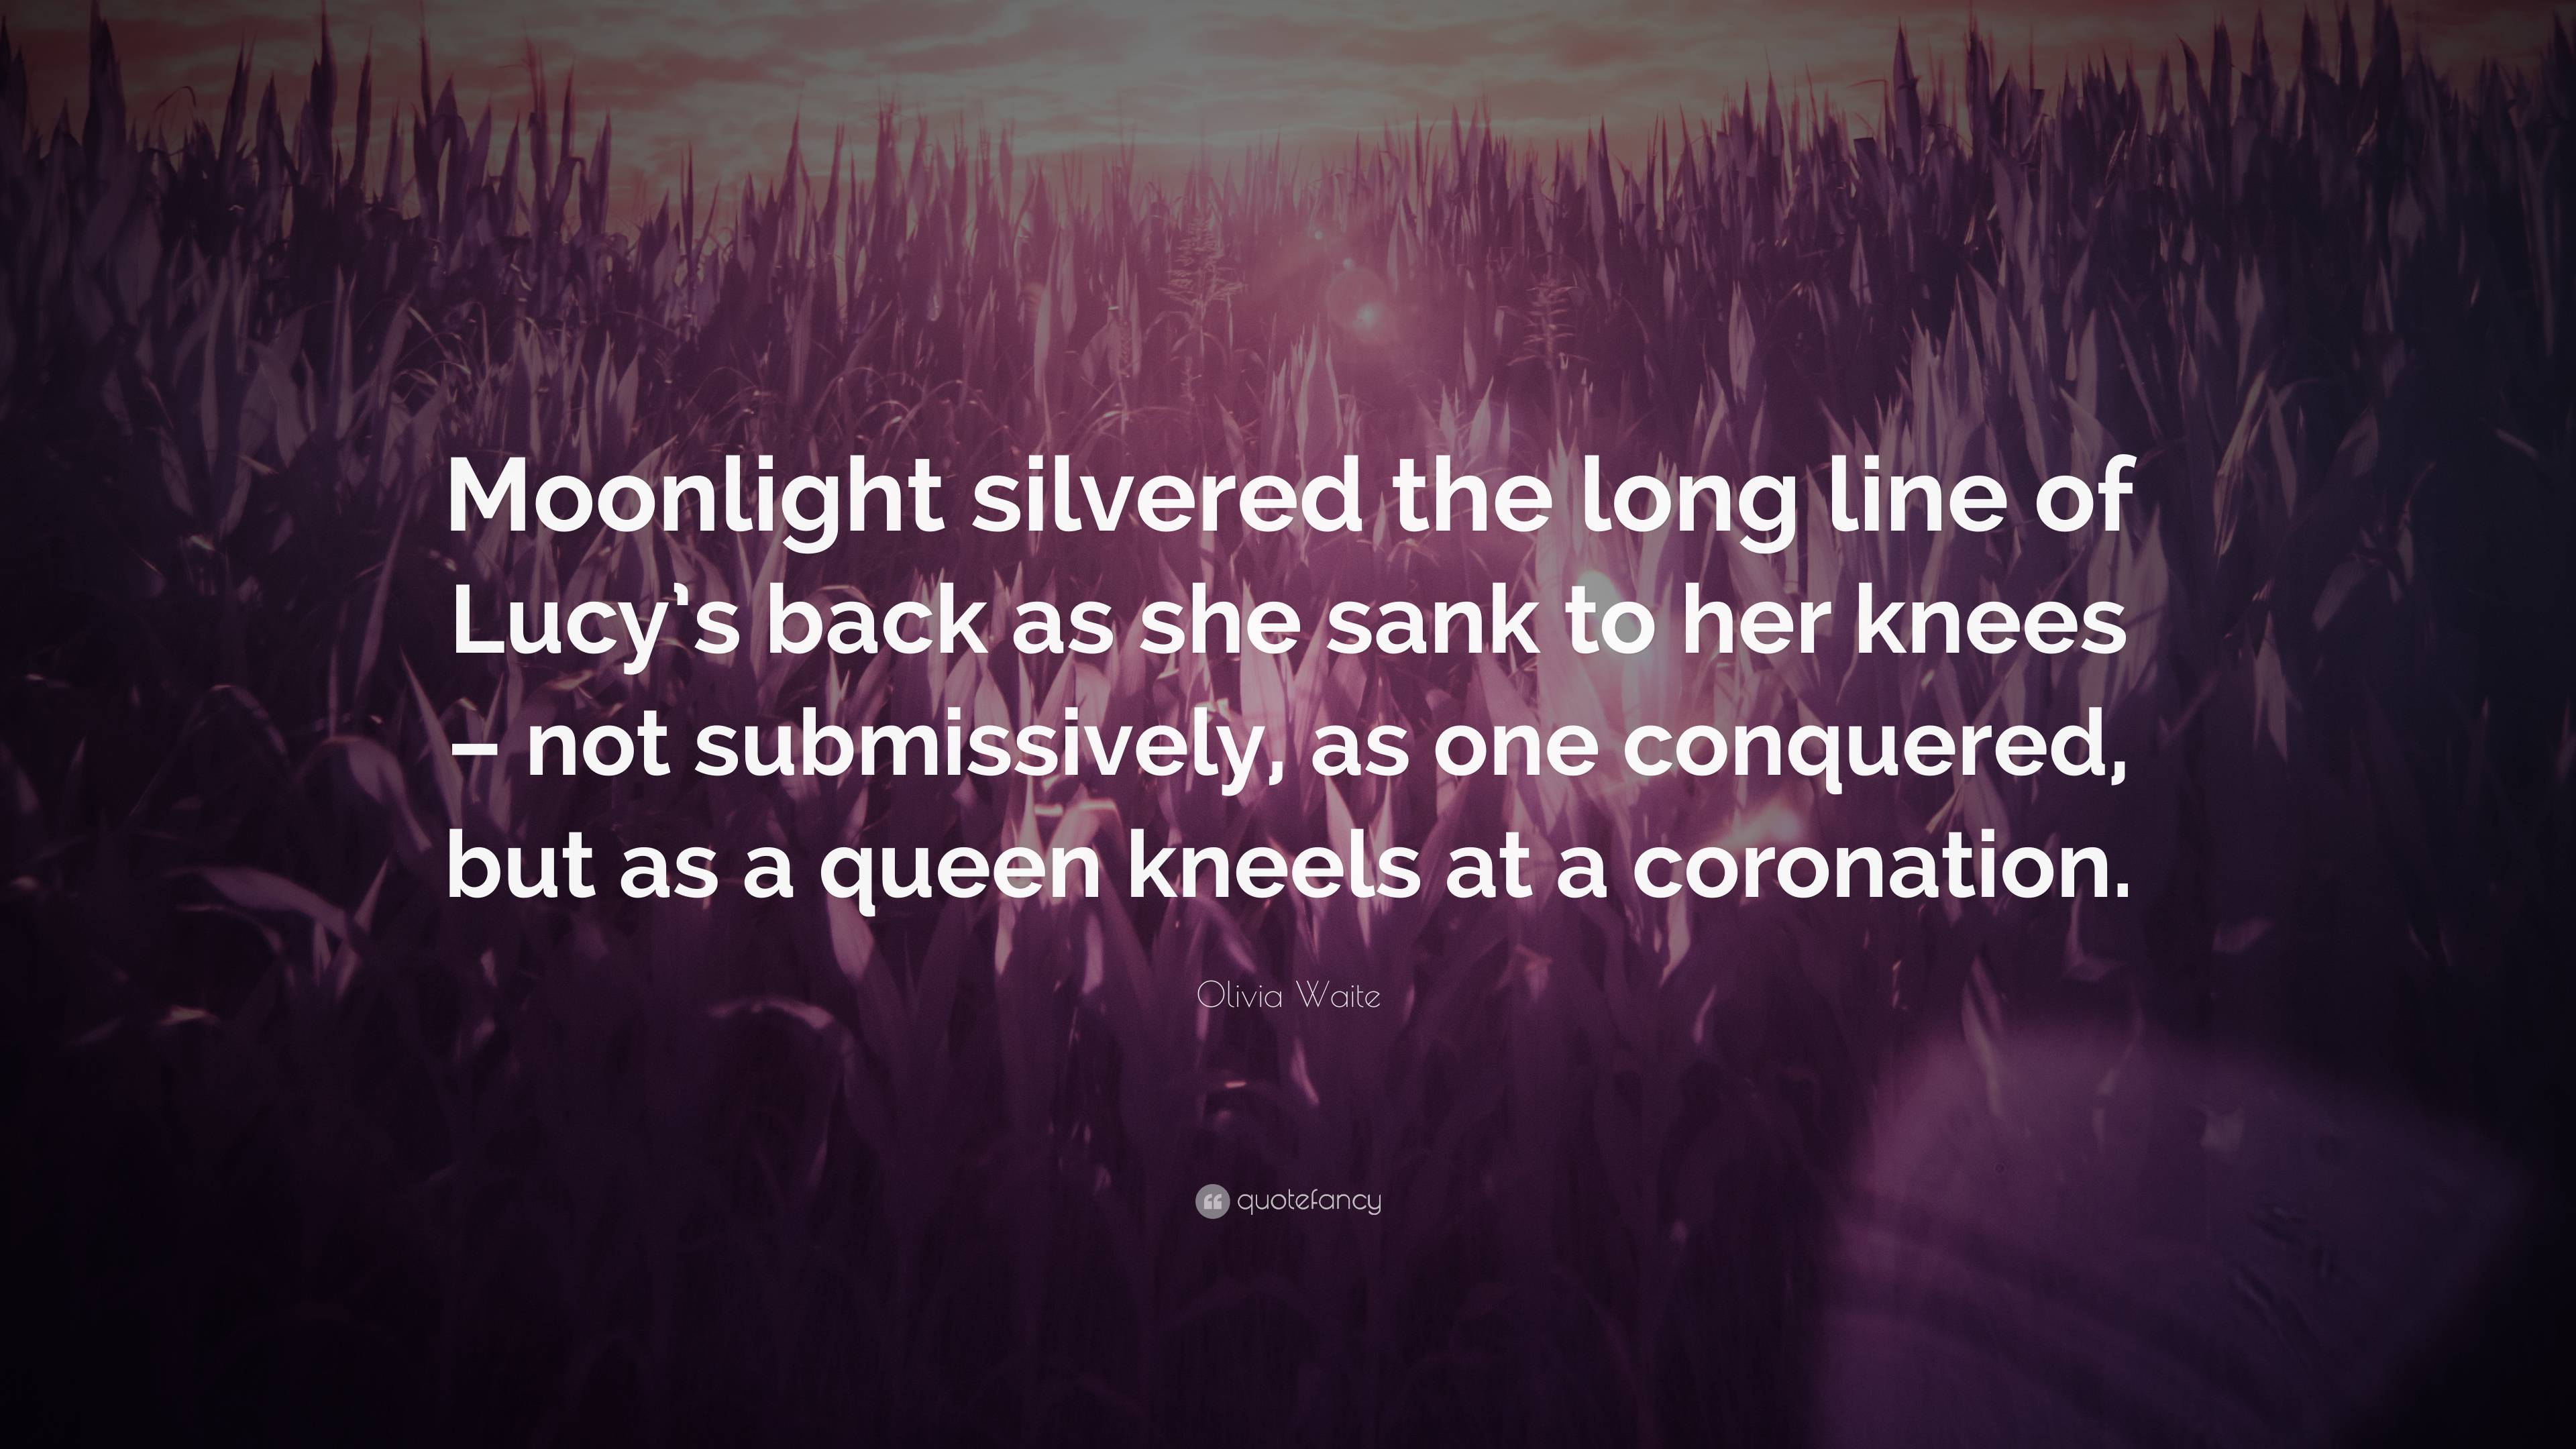 Olivia Waite Quote: “Moonlight silvered the long line of Lucy's back as she  sank to her knees – not submissively, as one conquered, but as a ”